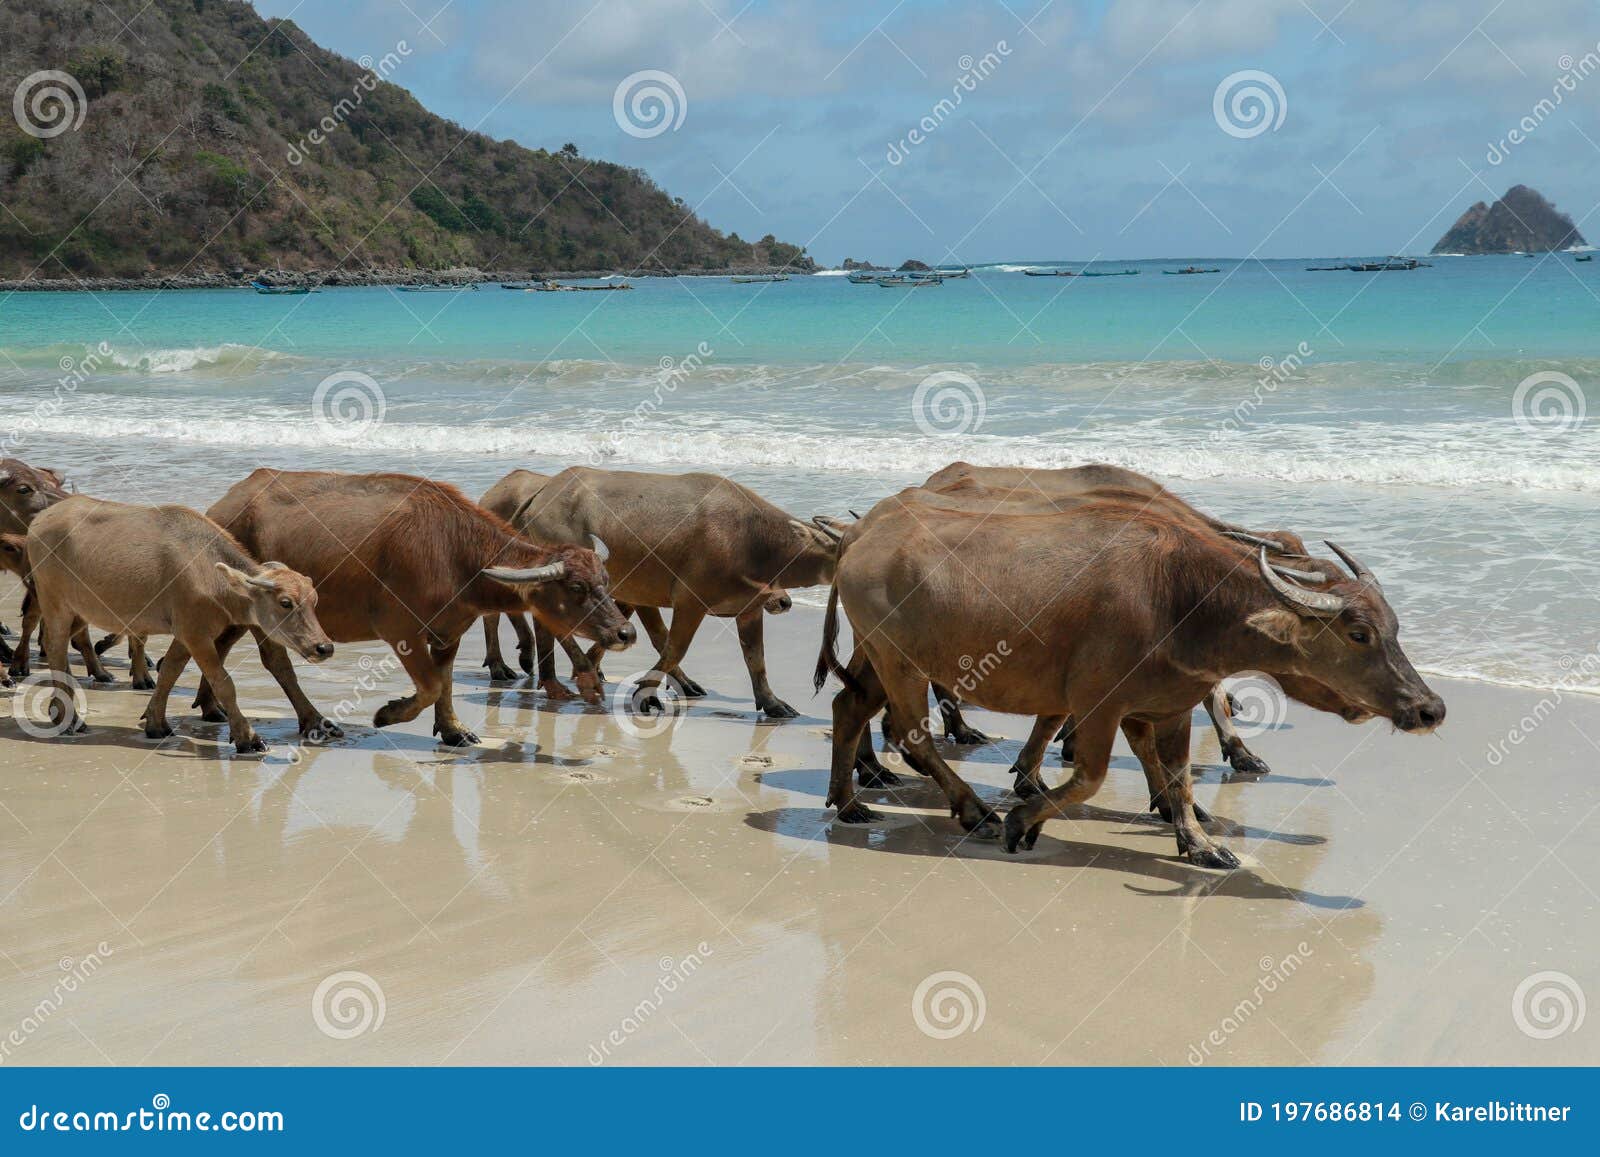 Water Buffalo Walking on White Sandy Beach at Lombok Island. Herd of Strolling by the Pleasant Evening Beach Stock Photo - Image of farmer, outdoor: 197686814